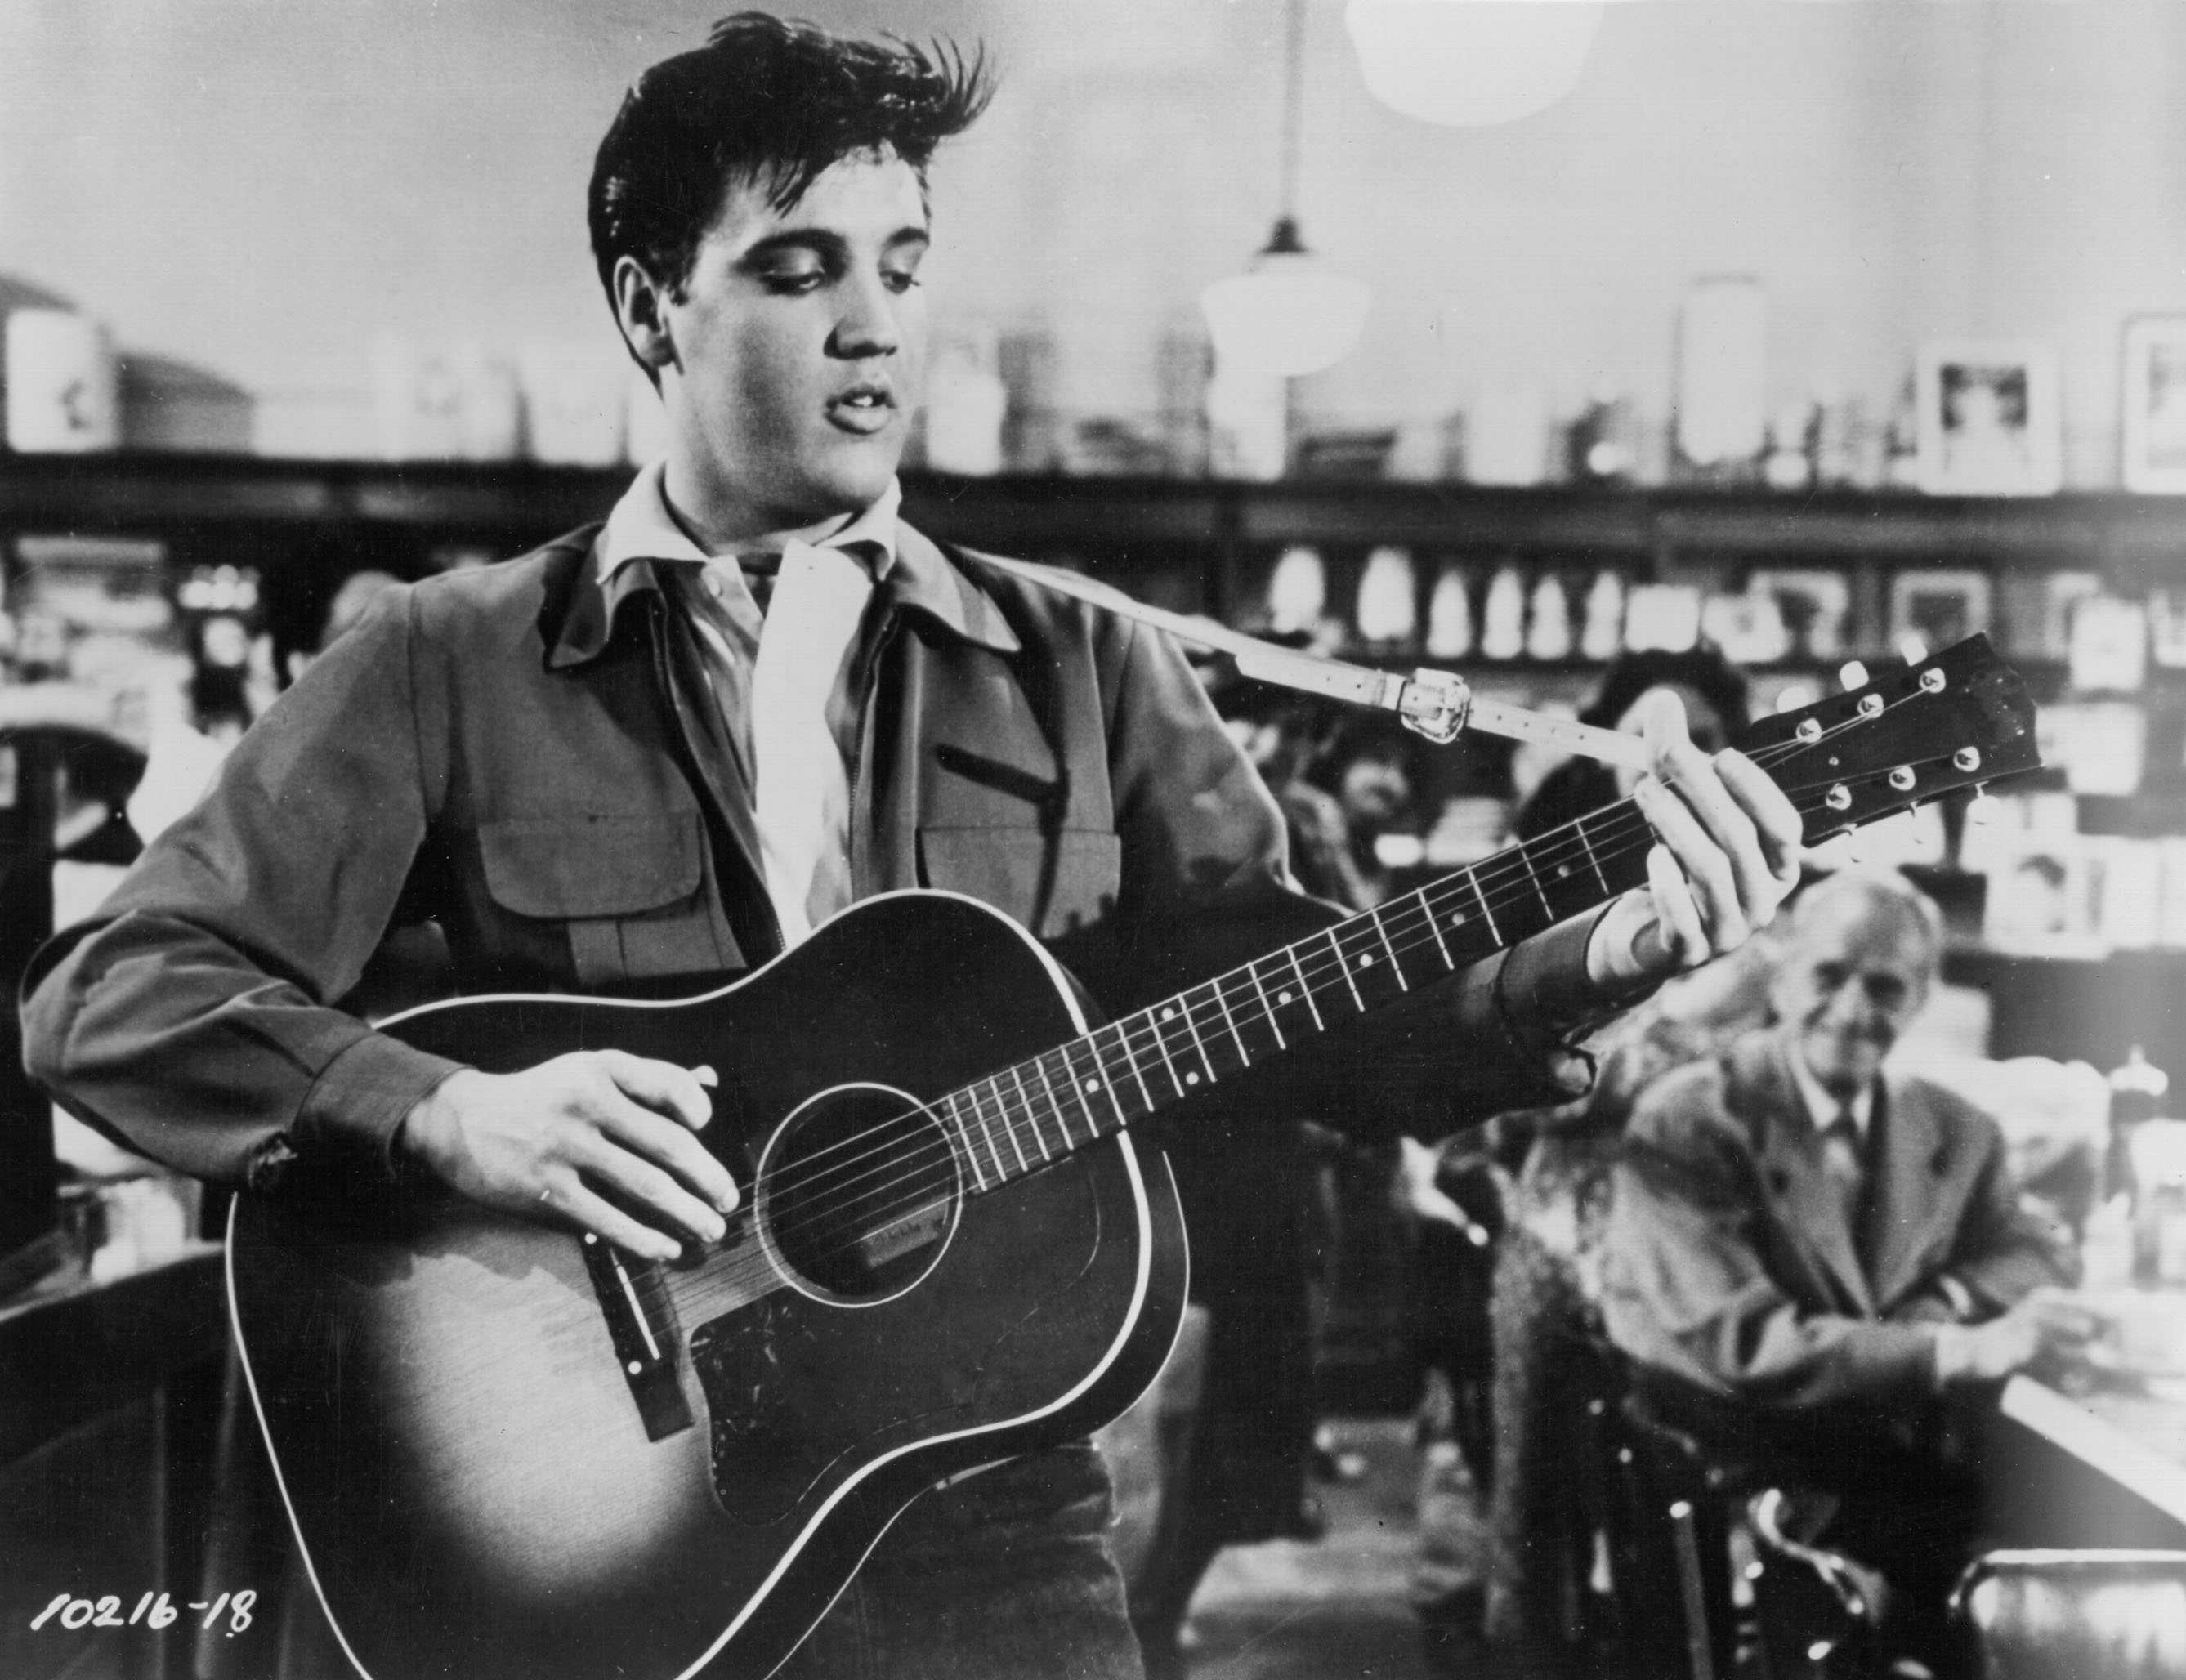 "In the Ghetto" singer Elvis Presley holding a guitar